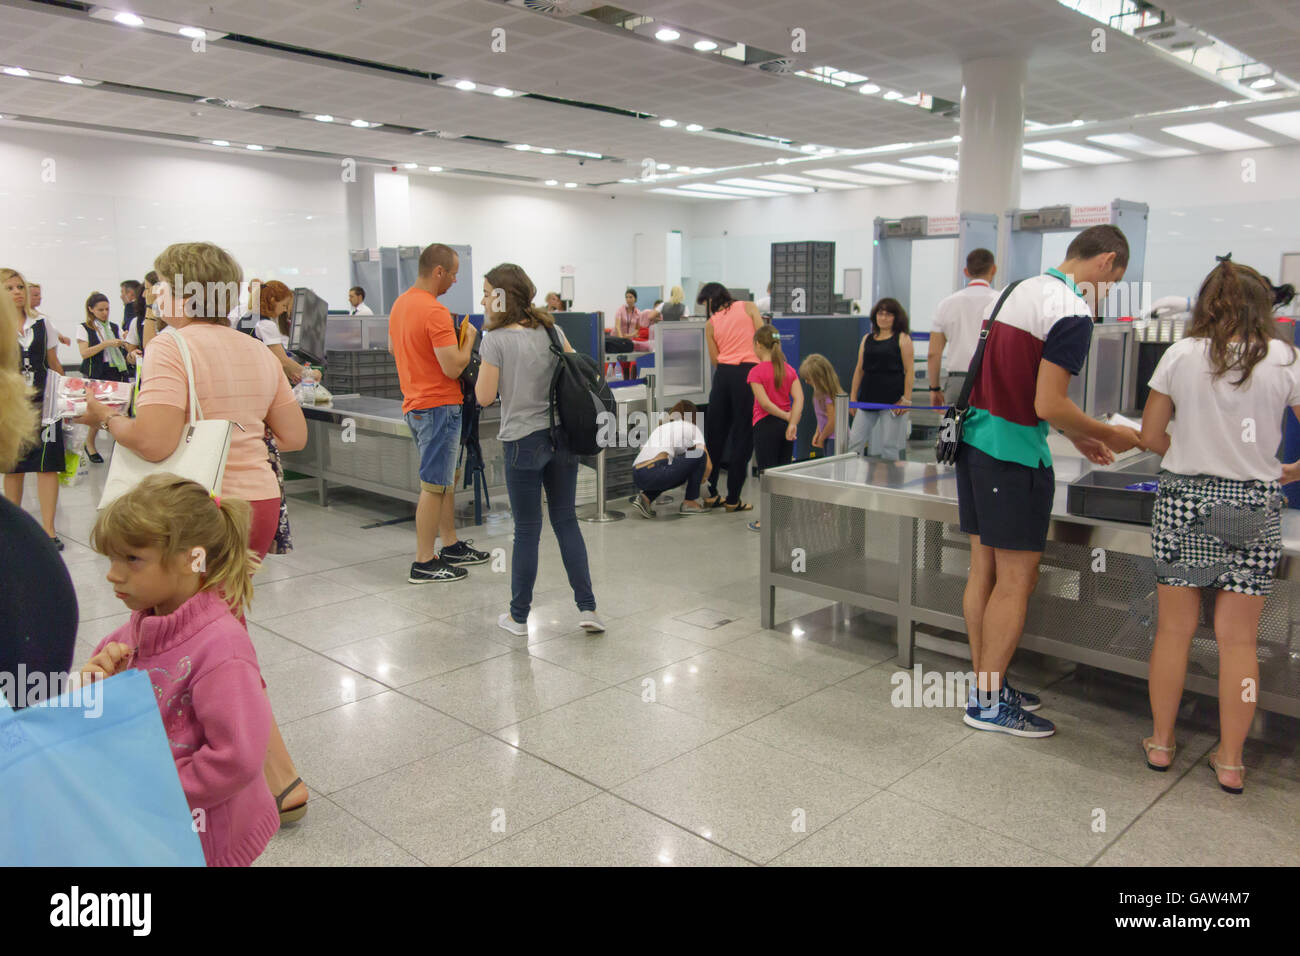 Burgas, Bulgaria - June 19, 2016: people pass inspection in the customs control zone of the airport Stock Photo